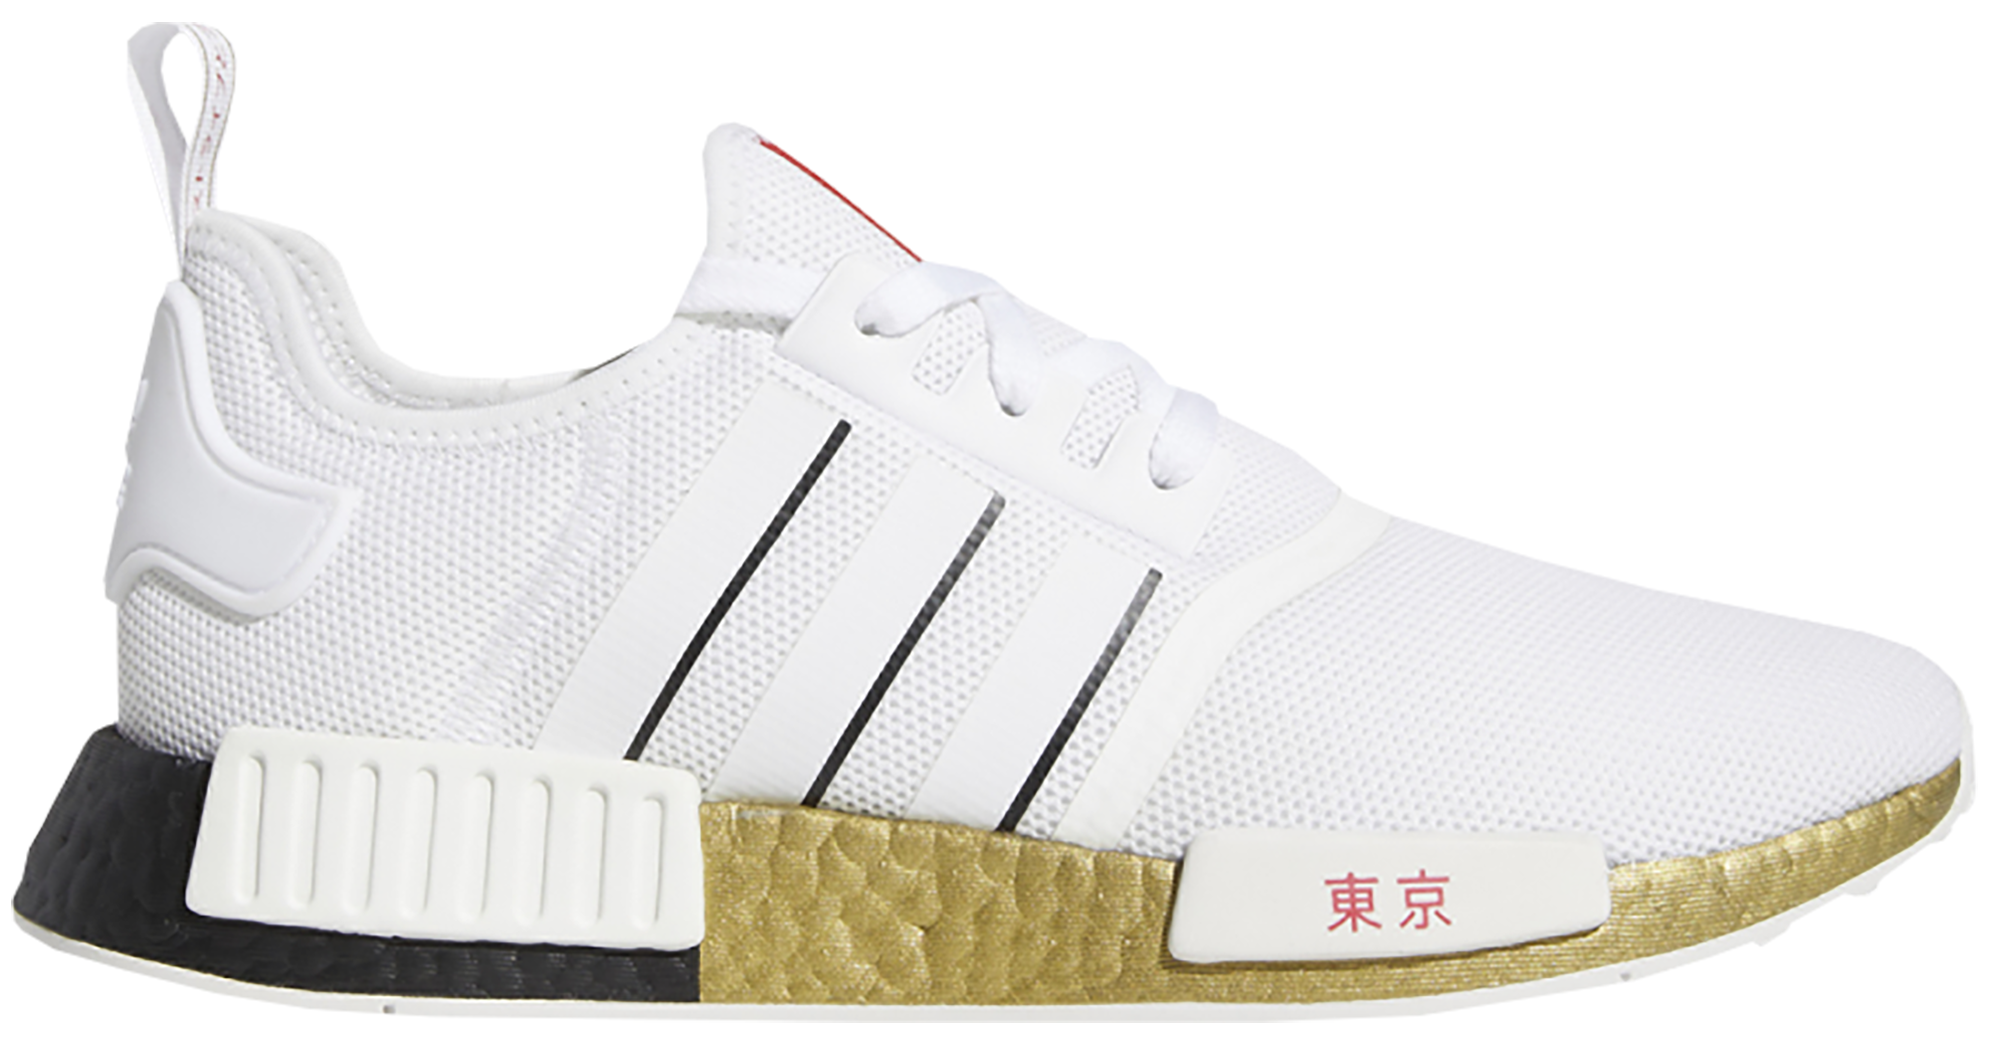 adidas NMD R1 United By Sneakers Tokyo 